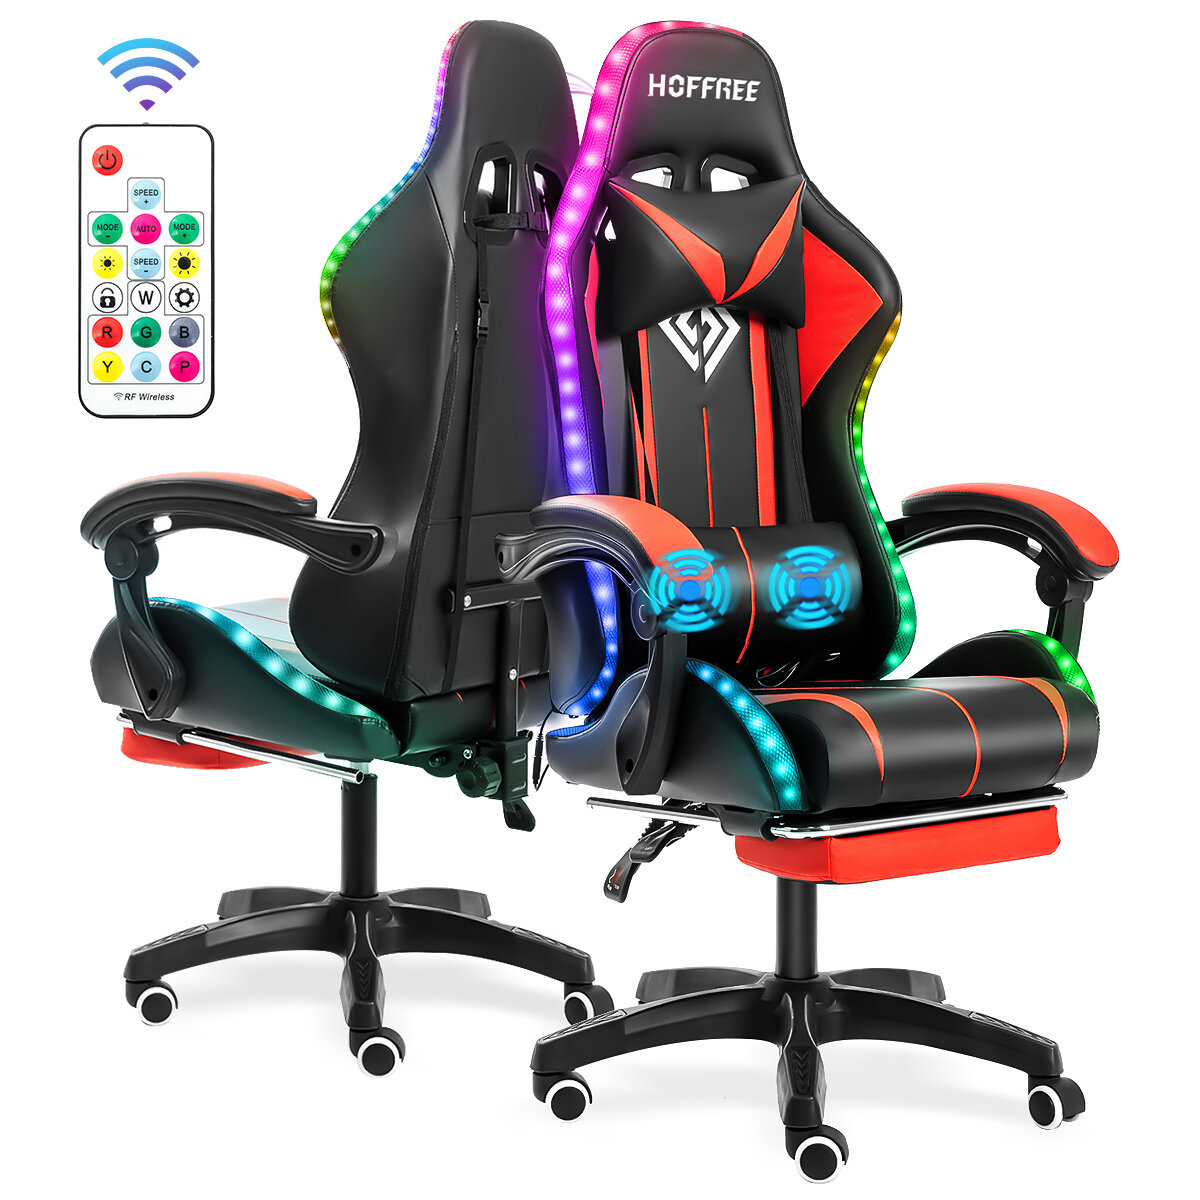 Hoffree Massage Gaming Chair Recliner Racing Chair RGB LED Lights with Footrest